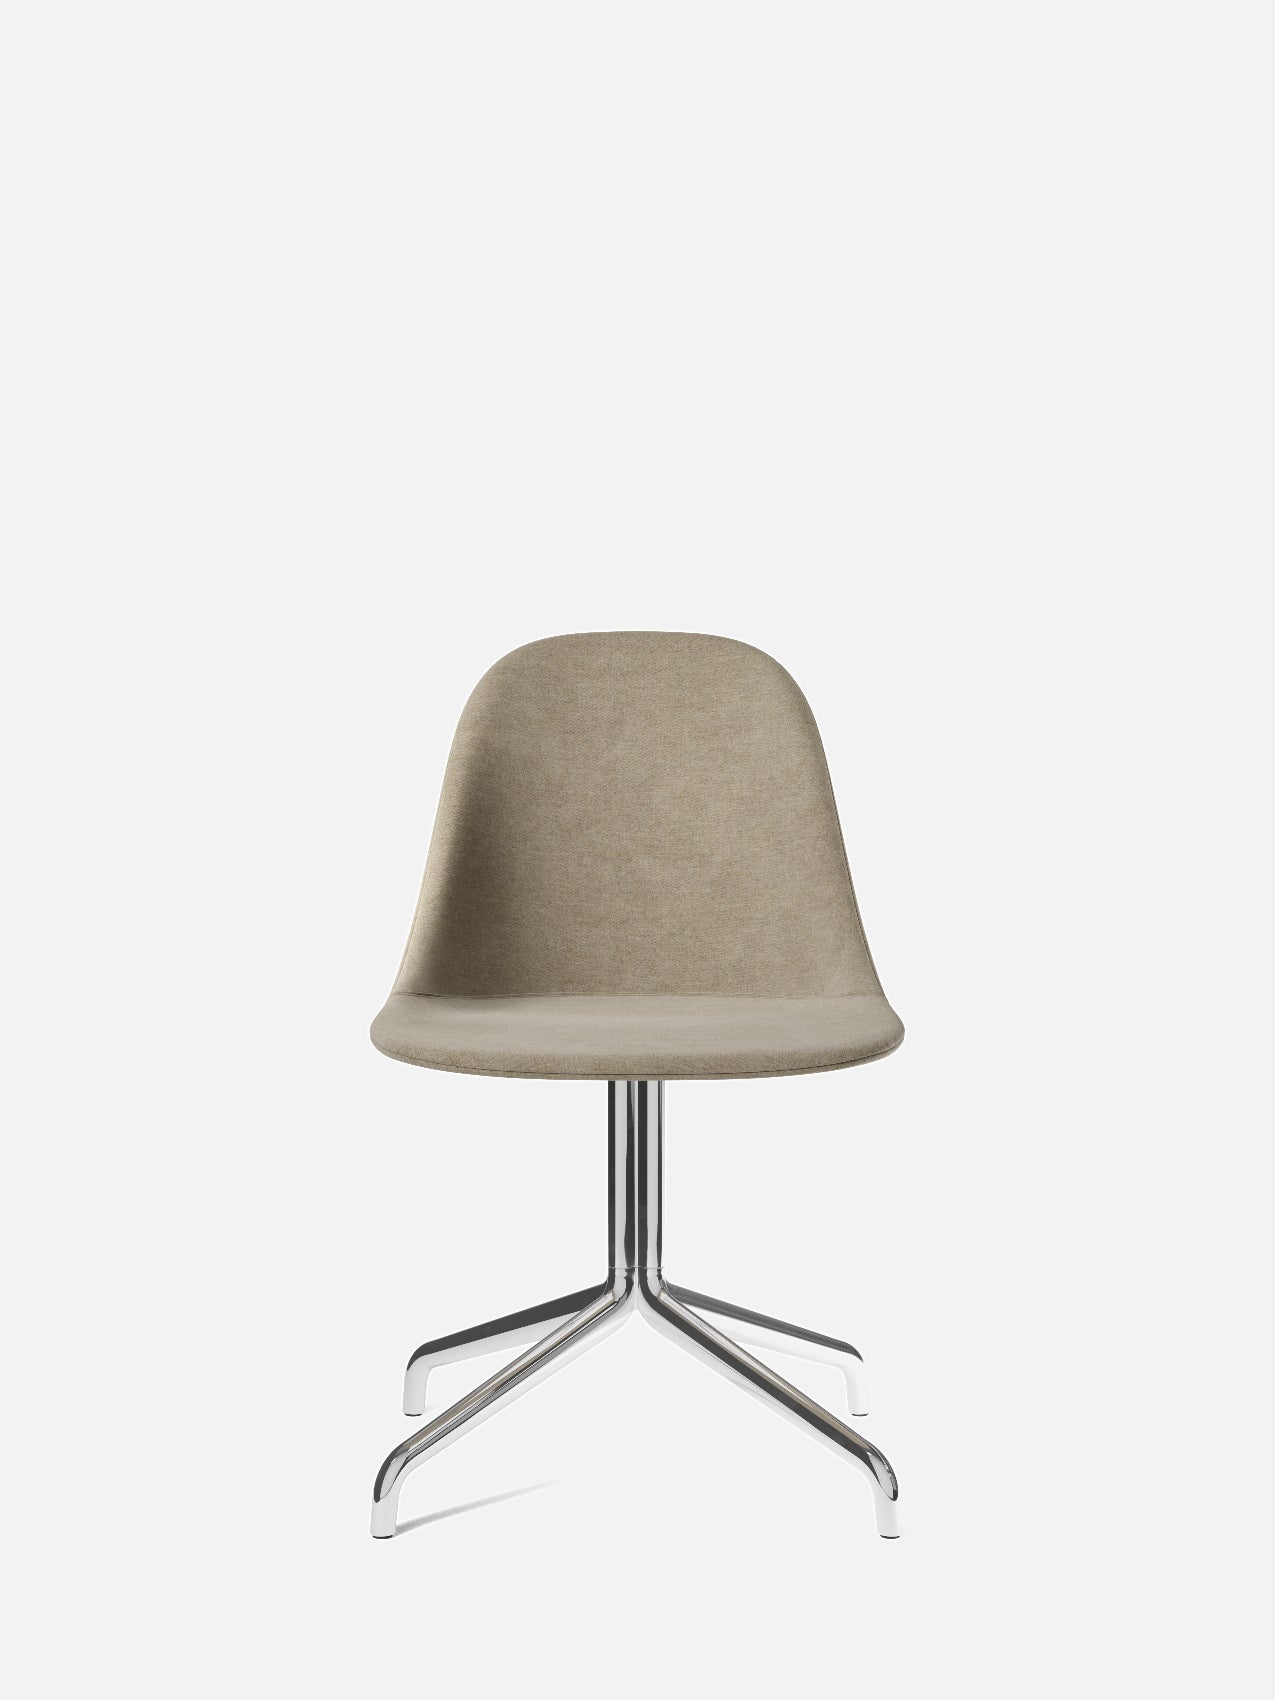 Harbour Side Chair, Upholstered-Chair-Norm Architects-Dining Height (Seat 17.7in H)/White Steel-961/Fiord2-menu-minimalist-modern-danish-design-home-decor